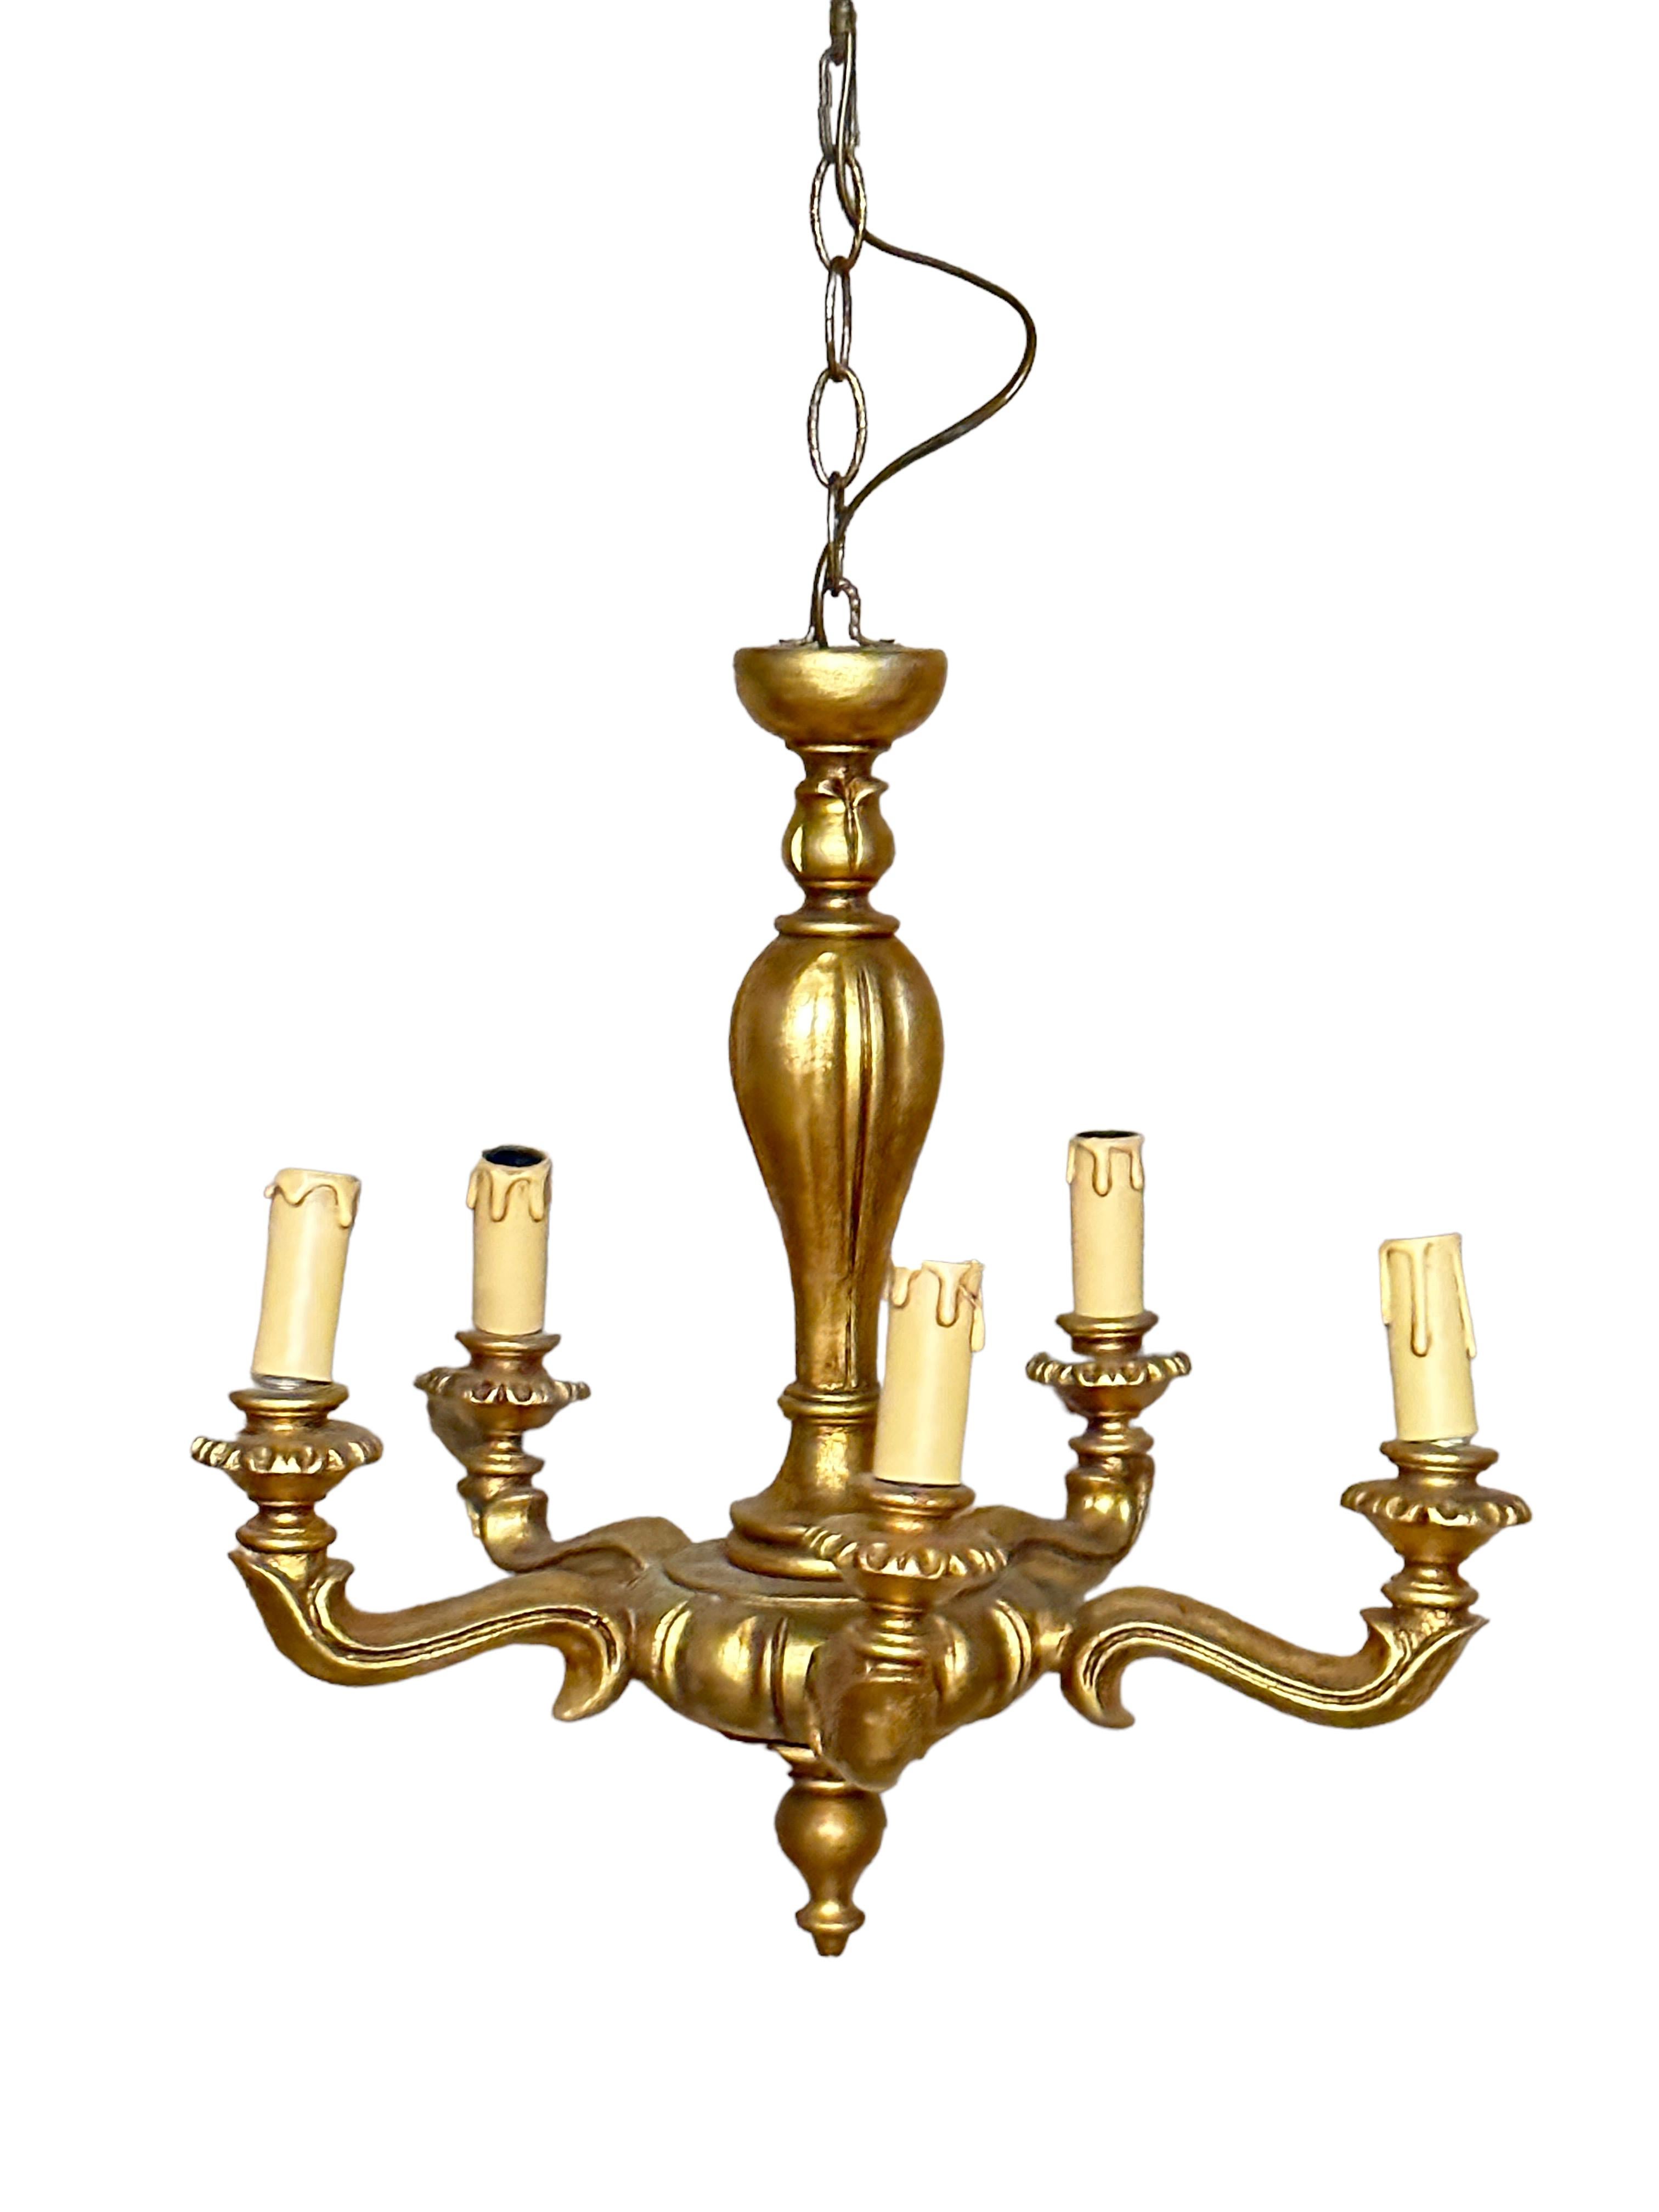 Add a touch of opulence to your home with this charming chandelier! Perfect gilt wood and hand carved chandelier to enhance any chic or eclectic home. We'd love to see it hanging at a dinning place as a charming welcome. The chain with canopy is